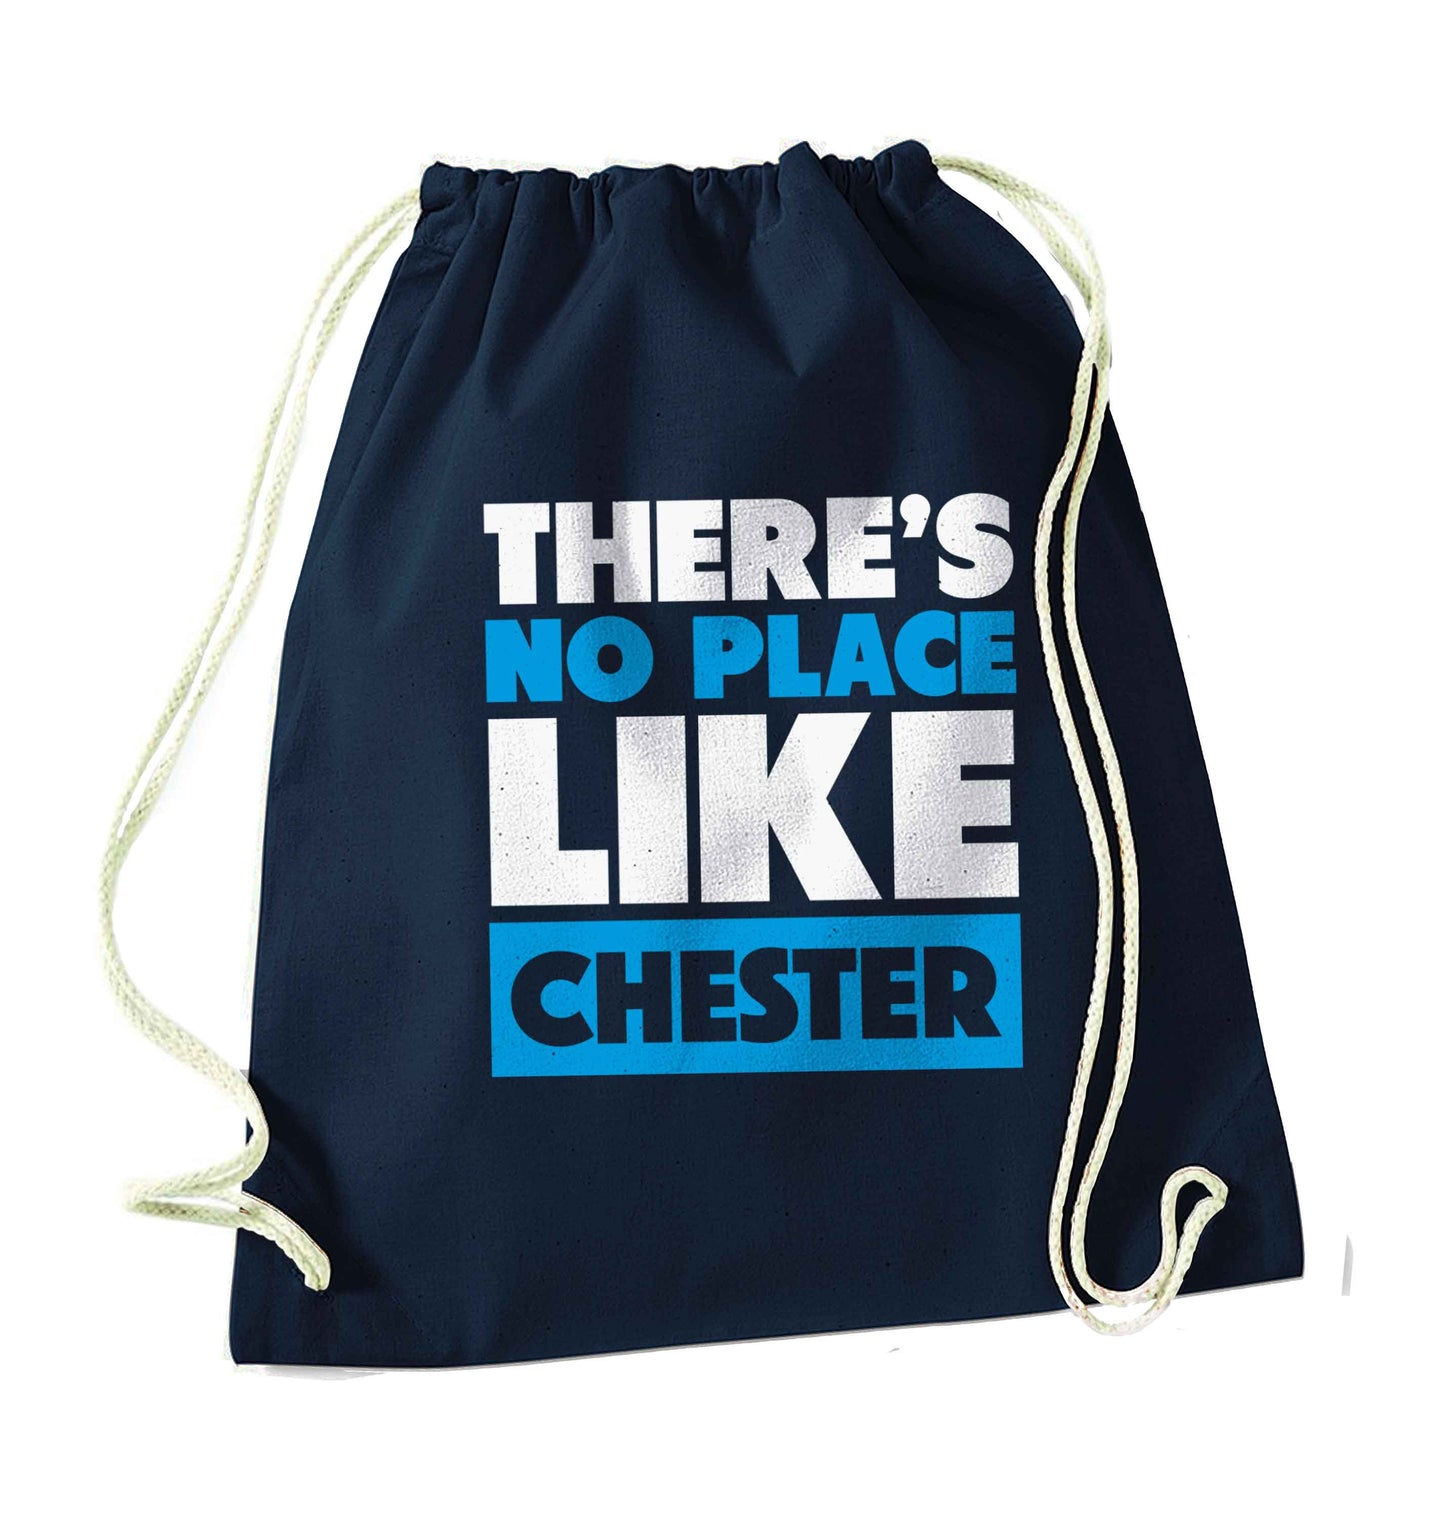 There's no place like Chester navy drawstring bag